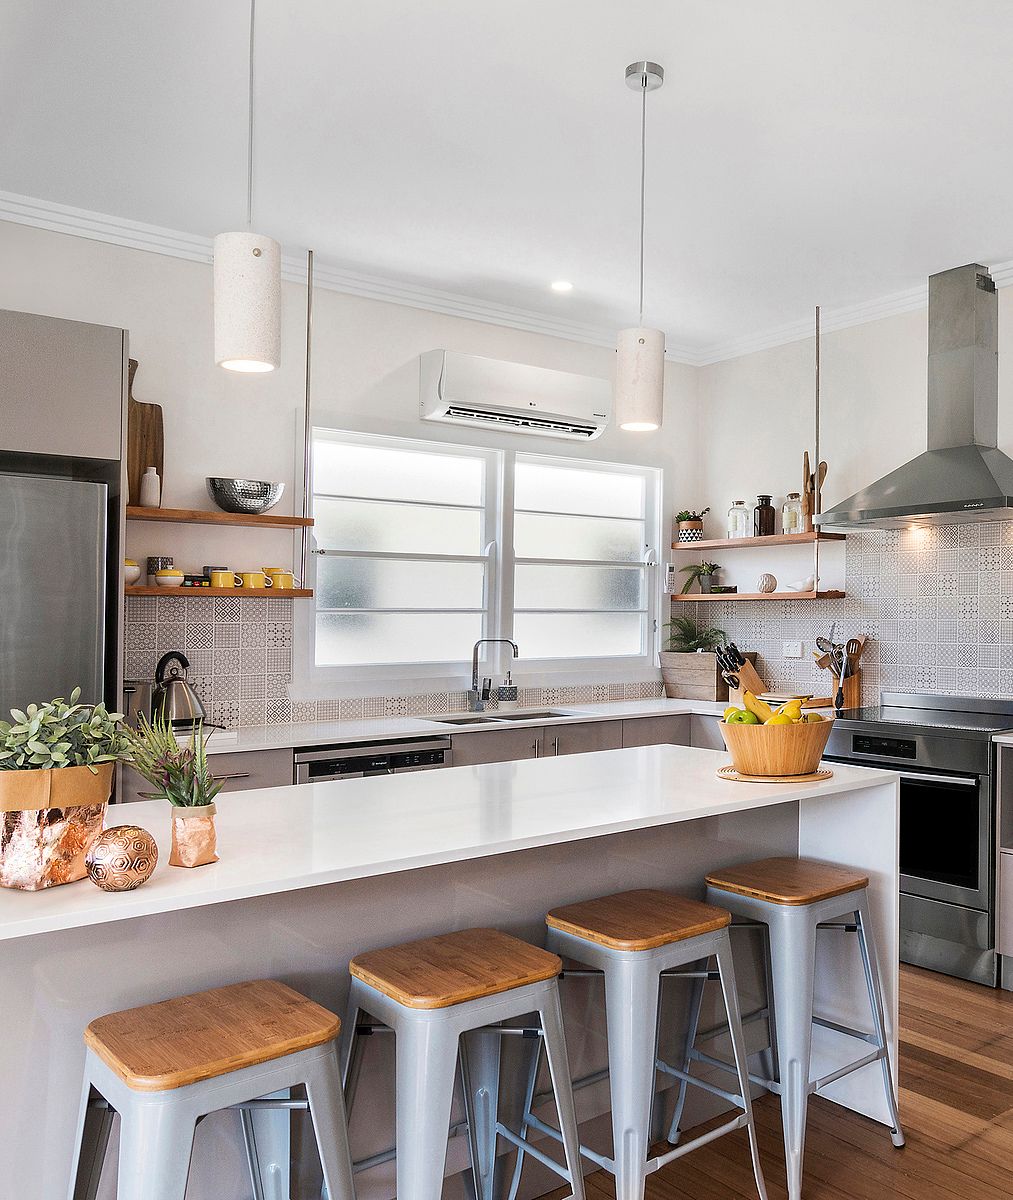 Top 10 most popular kitchen projects | Bunnings Workshop community